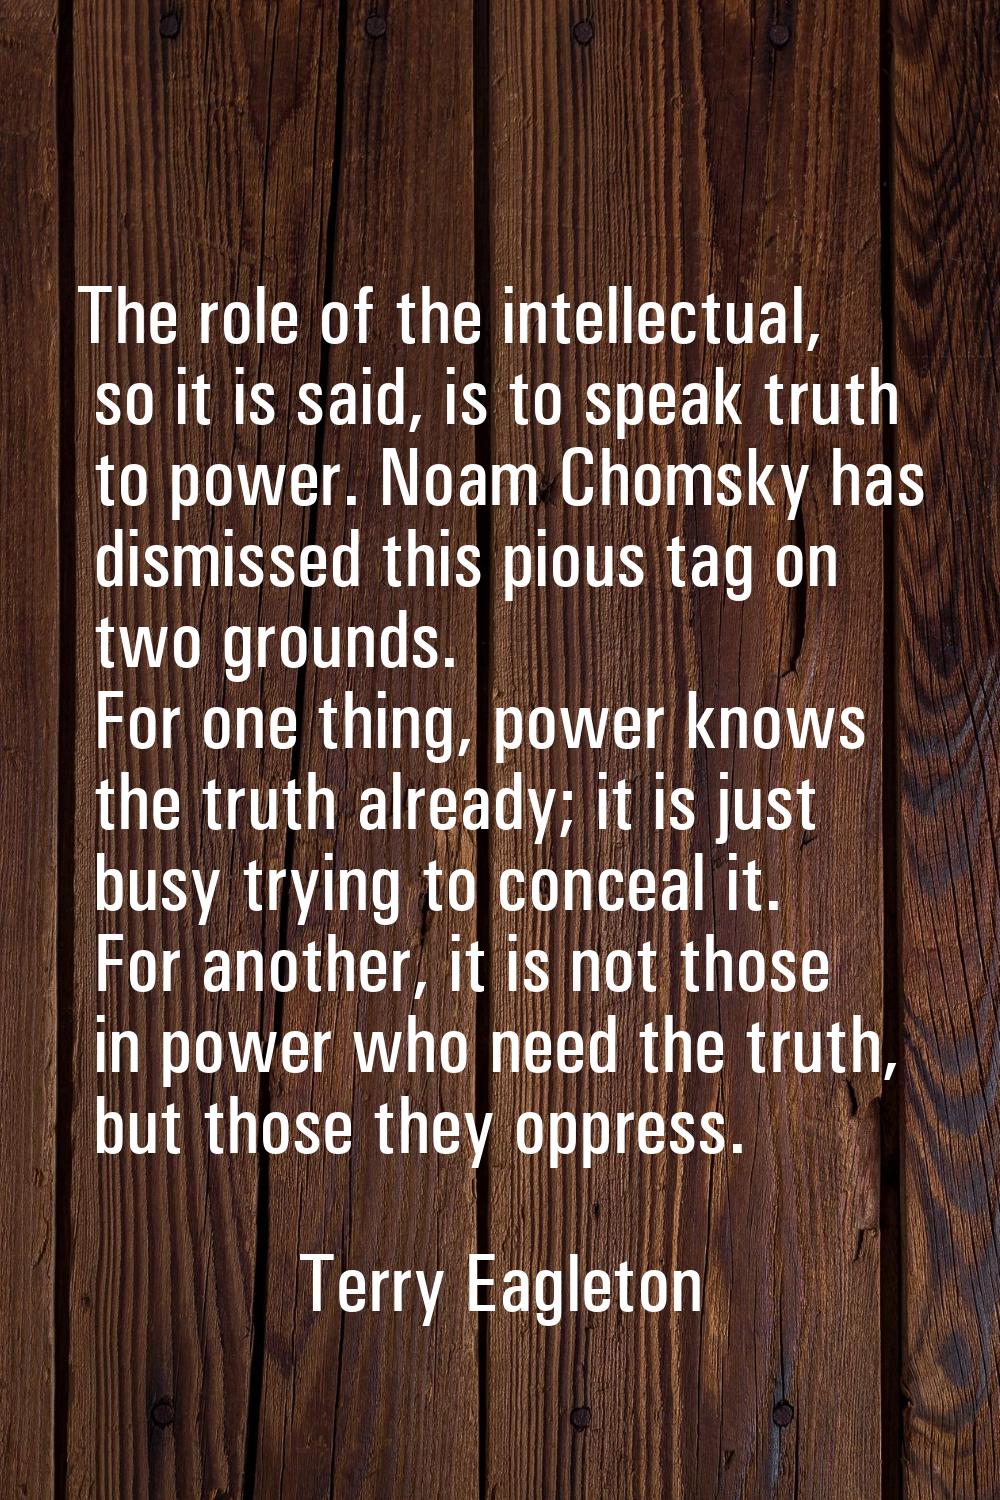 The role of the intellectual, so it is said, is to speak truth to power. Noam Chomsky has dismissed